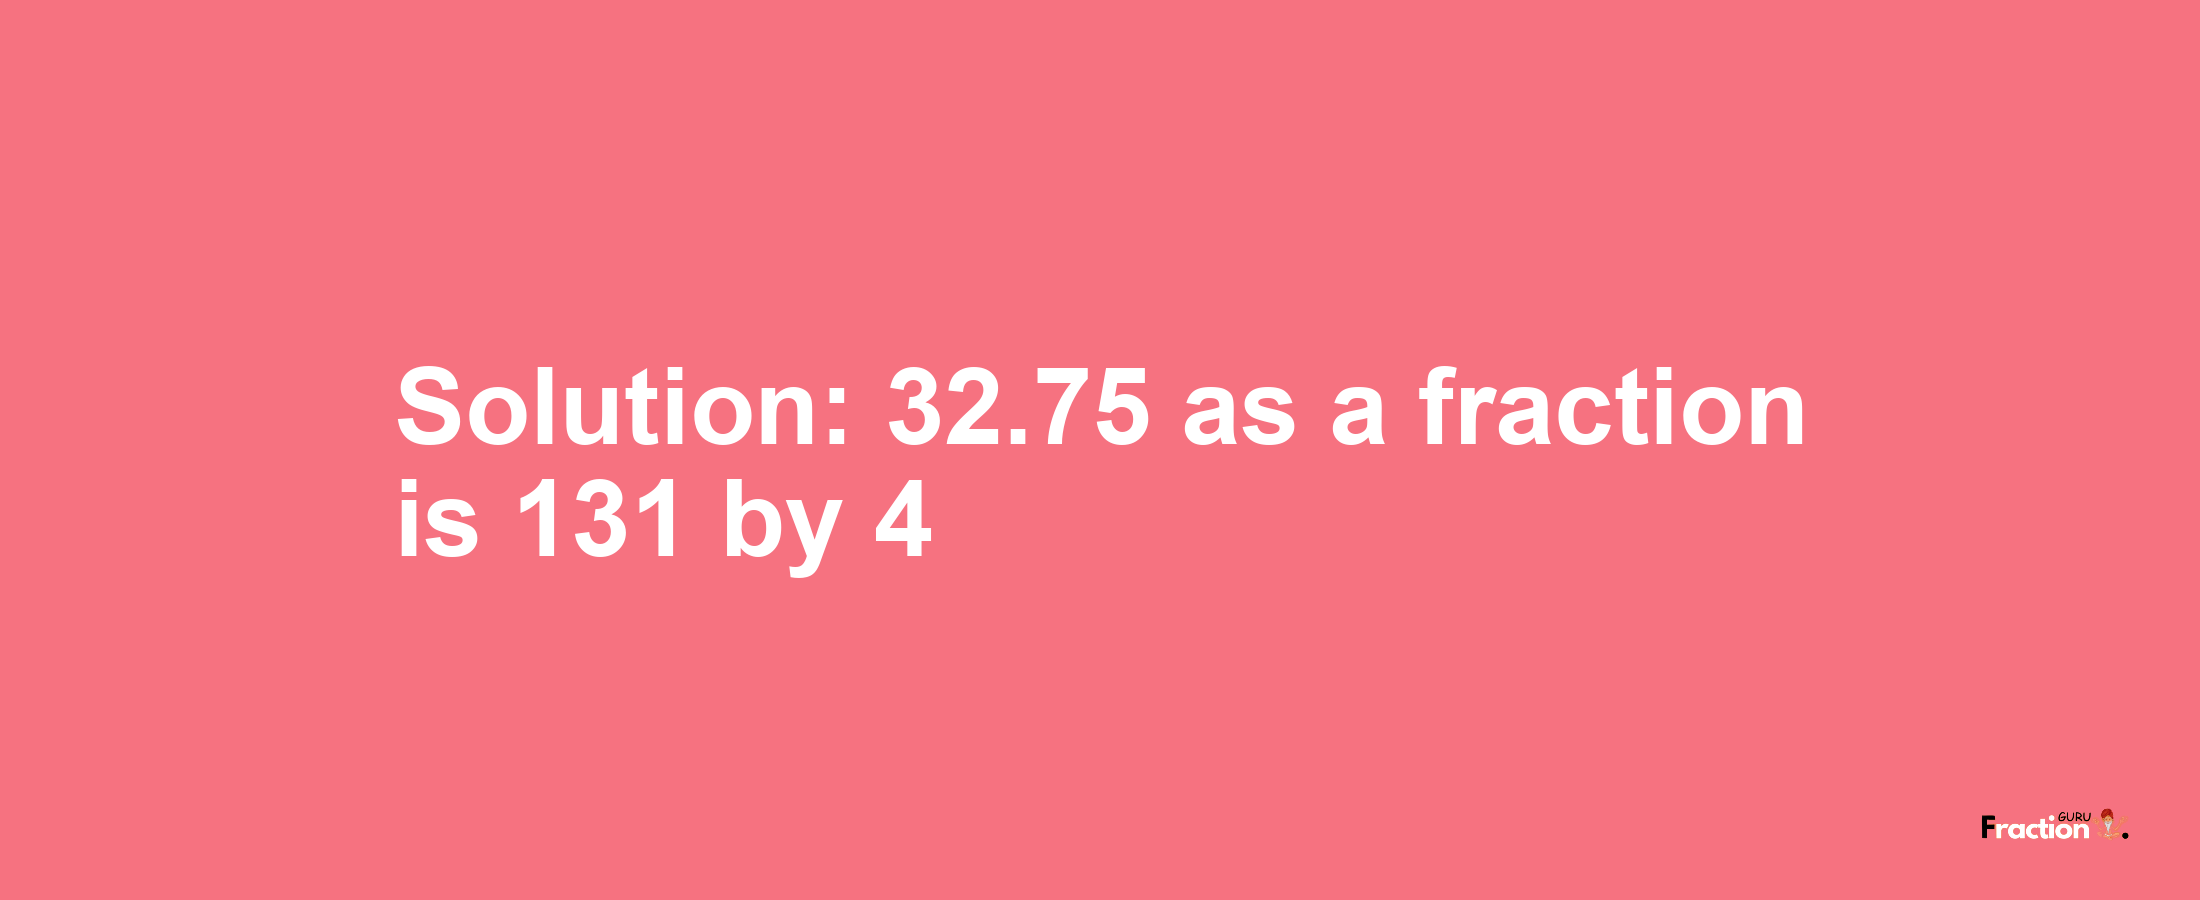 Solution:32.75 as a fraction is 131/4